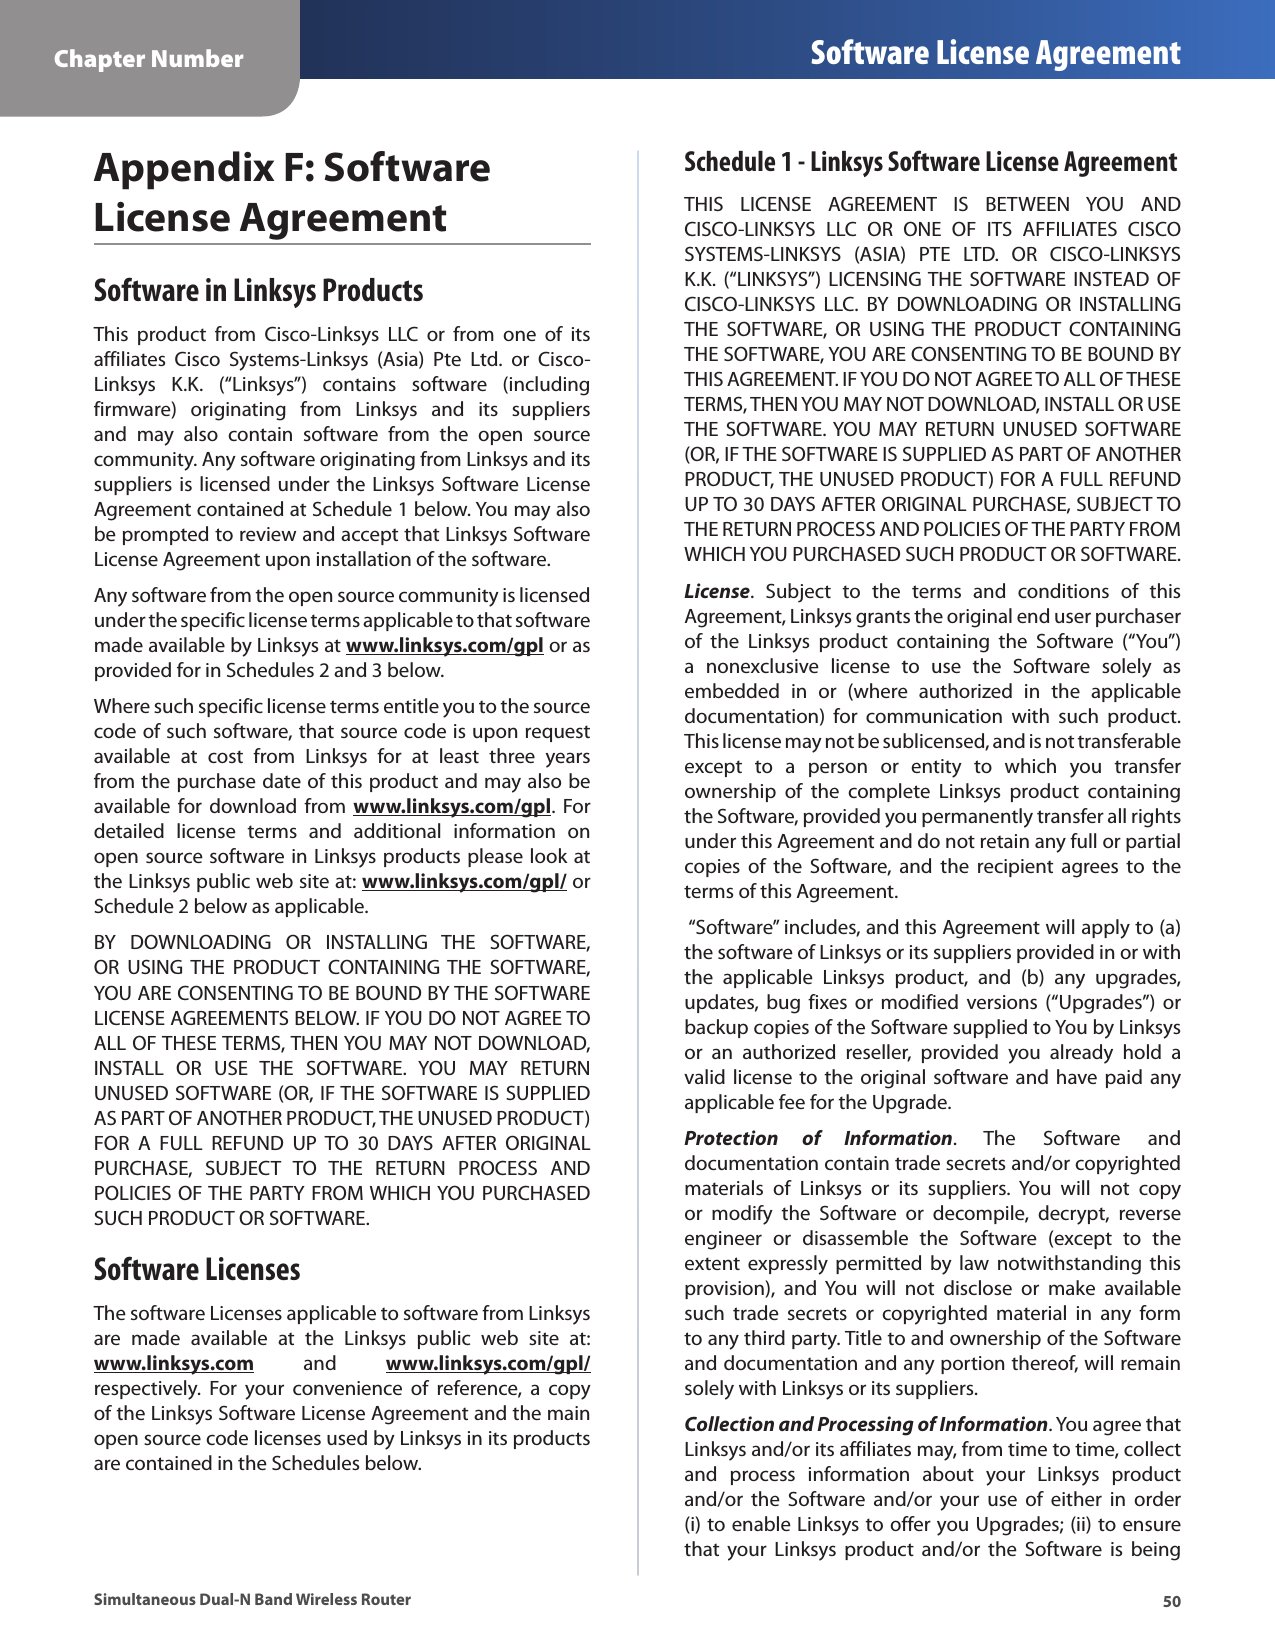 50Chapter Number Software License AgreementSimultaneous Dual-N Band Wireless RouterAppendix F: Software License AgreementSoftware in Linksys ProductsThis  product  from  Cisco-Linksys  LLC  or  from  one  of  its affiliates  Cisco  Systems-Linksys  (Asia)  Pte  Ltd.  or  Cisco-Linksys  K.K.  (“Linksys”)  contains  software  (including firmware)  originating  from  Linksys  and  its  suppliers and  may  also  contain  software  from  the  open  source community. Any software originating from Linksys and its suppliers is licensed under the Linksys Software License Agreement contained at Schedule 1 below. You may also be prompted to review and accept that Linksys Software License Agreement upon installation of the software. Any software from the open source community is licensed under the specific license terms applicable to that software made available by Linksys at www.linksys.com/gpl or as provided for in Schedules 2 and 3 below. Where such specific license terms entitle you to the source code of such software, that source code is upon request available  at  cost  from  Linksys  for  at  least  three  years from the purchase date of this product and may also be available for  download  from  www.linksys.com/gpl.  For detailed  license  terms  and  additional  information  on open source software in Linksys products please look at the Linksys public web site at: www.linksys.com/gpl/ or Schedule 2 below as applicable.BY  DOWNLOADING  OR  INSTALLING  THE  SOFTWARE, OR  USING  THE  PRODUCT  CONTAINING  THE  SOFTWARE, YOU ARE CONSENTING TO BE BOUND BY THE SOFTWARE LICENSE AGREEMENTS BELOW. IF YOU DO NOT AGREE TO ALL OF THESE TERMS, THEN YOU MAY NOT DOWNLOAD, INSTALL  OR  USE  THE  SOFTWARE.  YOU  MAY  RETURN UNUSED SOFTWARE (OR, IF THE SOFTWARE IS SUPPLIED AS PART OF ANOTHER PRODUCT, THE UNUSED PRODUCT) FOR  A  FULL  REFUND  UP  TO  30  DAYS  AFTER  ORIGINAL PURCHASE,  SUBJECT  TO  THE  RETURN  PROCESS  AND POLICIES OF THE PARTY FROM WHICH YOU PURCHASED SUCH PRODUCT OR SOFTWARE.Software LicensesThe software Licenses applicable to software from Linksys are  made  available  at  the  Linksys  public  web  site  at:  www.linksys.com  and  www.linksys.com/gpl/ respectively.  For  your  convenience  of  reference,  a  copy of the Linksys Software License Agreement and the main open source code licenses used by Linksys in its products are contained in the Schedules below.Schedule 1 - Linksys Software License AgreementTHIS  LICENSE  AGREEMENT  IS  BETWEEN  YOU  AND CISCO-LINKSYS  LLC  OR  ONE  OF  ITS  AFFILIATES  CISCO SYSTEMS-LINKSYS  (ASIA)  PTE  LTD.  OR  CISCO-LINKSYS K.K.  (“LINKSYS”) LICENSING THE  SOFTWARE  INSTEAD  OF CISCO-LINKSYS  LLC.  BY  DOWNLOADING  OR  INSTALLING THE  SOFTWARE,  OR  USING  THE  PRODUCT  CONTAINING THE SOFTWARE, YOU ARE CONSENTING TO BE BOUND BY THIS AGREEMENT. IF YOU DO NOT AGREE TO ALL OF THESE TERMS, THEN YOU MAY NOT DOWNLOAD, INSTALL OR USE THE  SOFTWARE. YOU  MAY  RETURN UNUSED  SOFTWARE (OR, IF THE SOFTWARE IS SUPPLIED AS PART OF ANOTHER PRODUCT, THE UNUSED PRODUCT) FOR A FULL REFUND UP TO 30 DAYS AFTER ORIGINAL PURCHASE, SUBJECT TO THE RETURN PROCESS AND POLICIES OF THE PARTY FROM WHICH YOU PURCHASED SUCH PRODUCT OR SOFTWARE.License.  Subject  to  the  terms  and  conditions  of  this Agreement, Linksys grants the original end user purchaser of  the  Linksys  product  containing  the  Software  (“You”) a  nonexclusive  license  to  use  the  Software  solely  as embedded  in  or  (where  authorized  in  the  applicable documentation)  for  communication  with  such  product. This license may not be sublicensed, and is not transferable except  to  a  person  or  entity  to  which  you  transfer ownership  of  the  complete  Linksys  product  containing the Software, provided you permanently transfer all rights under this Agreement and do not retain any full or partial copies  of  the  Software,  and  the  recipient  agrees  to  the terms of this Agreement.  “Software” includes, and this Agreement will apply to (a) the software of Linksys or its suppliers provided in or with the  applicable  Linksys  product,  and  (b)  any  upgrades, updates, bug  fixes or  modified  versions (“Upgrades”) or backup copies of the Software supplied to You by Linksys or  an  authorized  reseller,  provided  you  already  hold  a valid license to the original software and  have paid any applicable fee for the Upgrade. Protection  of  Information.  The  Software  and documentation contain trade secrets and/or copyrighted materials  of  Linksys  or  its  suppliers.  You  will  not  copy or  modify  the  Software  or  decompile,  decrypt,  reverse engineer  or  disassemble  the  Software  (except  to  the extent  expressly  permitted by  law  notwithstanding  this provision),  and  You  will  not  disclose  or  make  available such  trade  secrets  or  copyrighted  material  in  any  form to any third party. Title to and ownership of the Software and documentation and any portion thereof, will remain solely with Linksys or its suppliers.Collection and Processing of Information. You agree that Linksys and/or its affiliates may, from time to time, collect and  process  information  about  your  Linksys  product and/or  the  Software  and/or  your  use  of  either  in  order (i) to enable Linksys to offer you Upgrades; (ii) to ensure that  your  Linksys  product  and/or  the  Software  is  being 